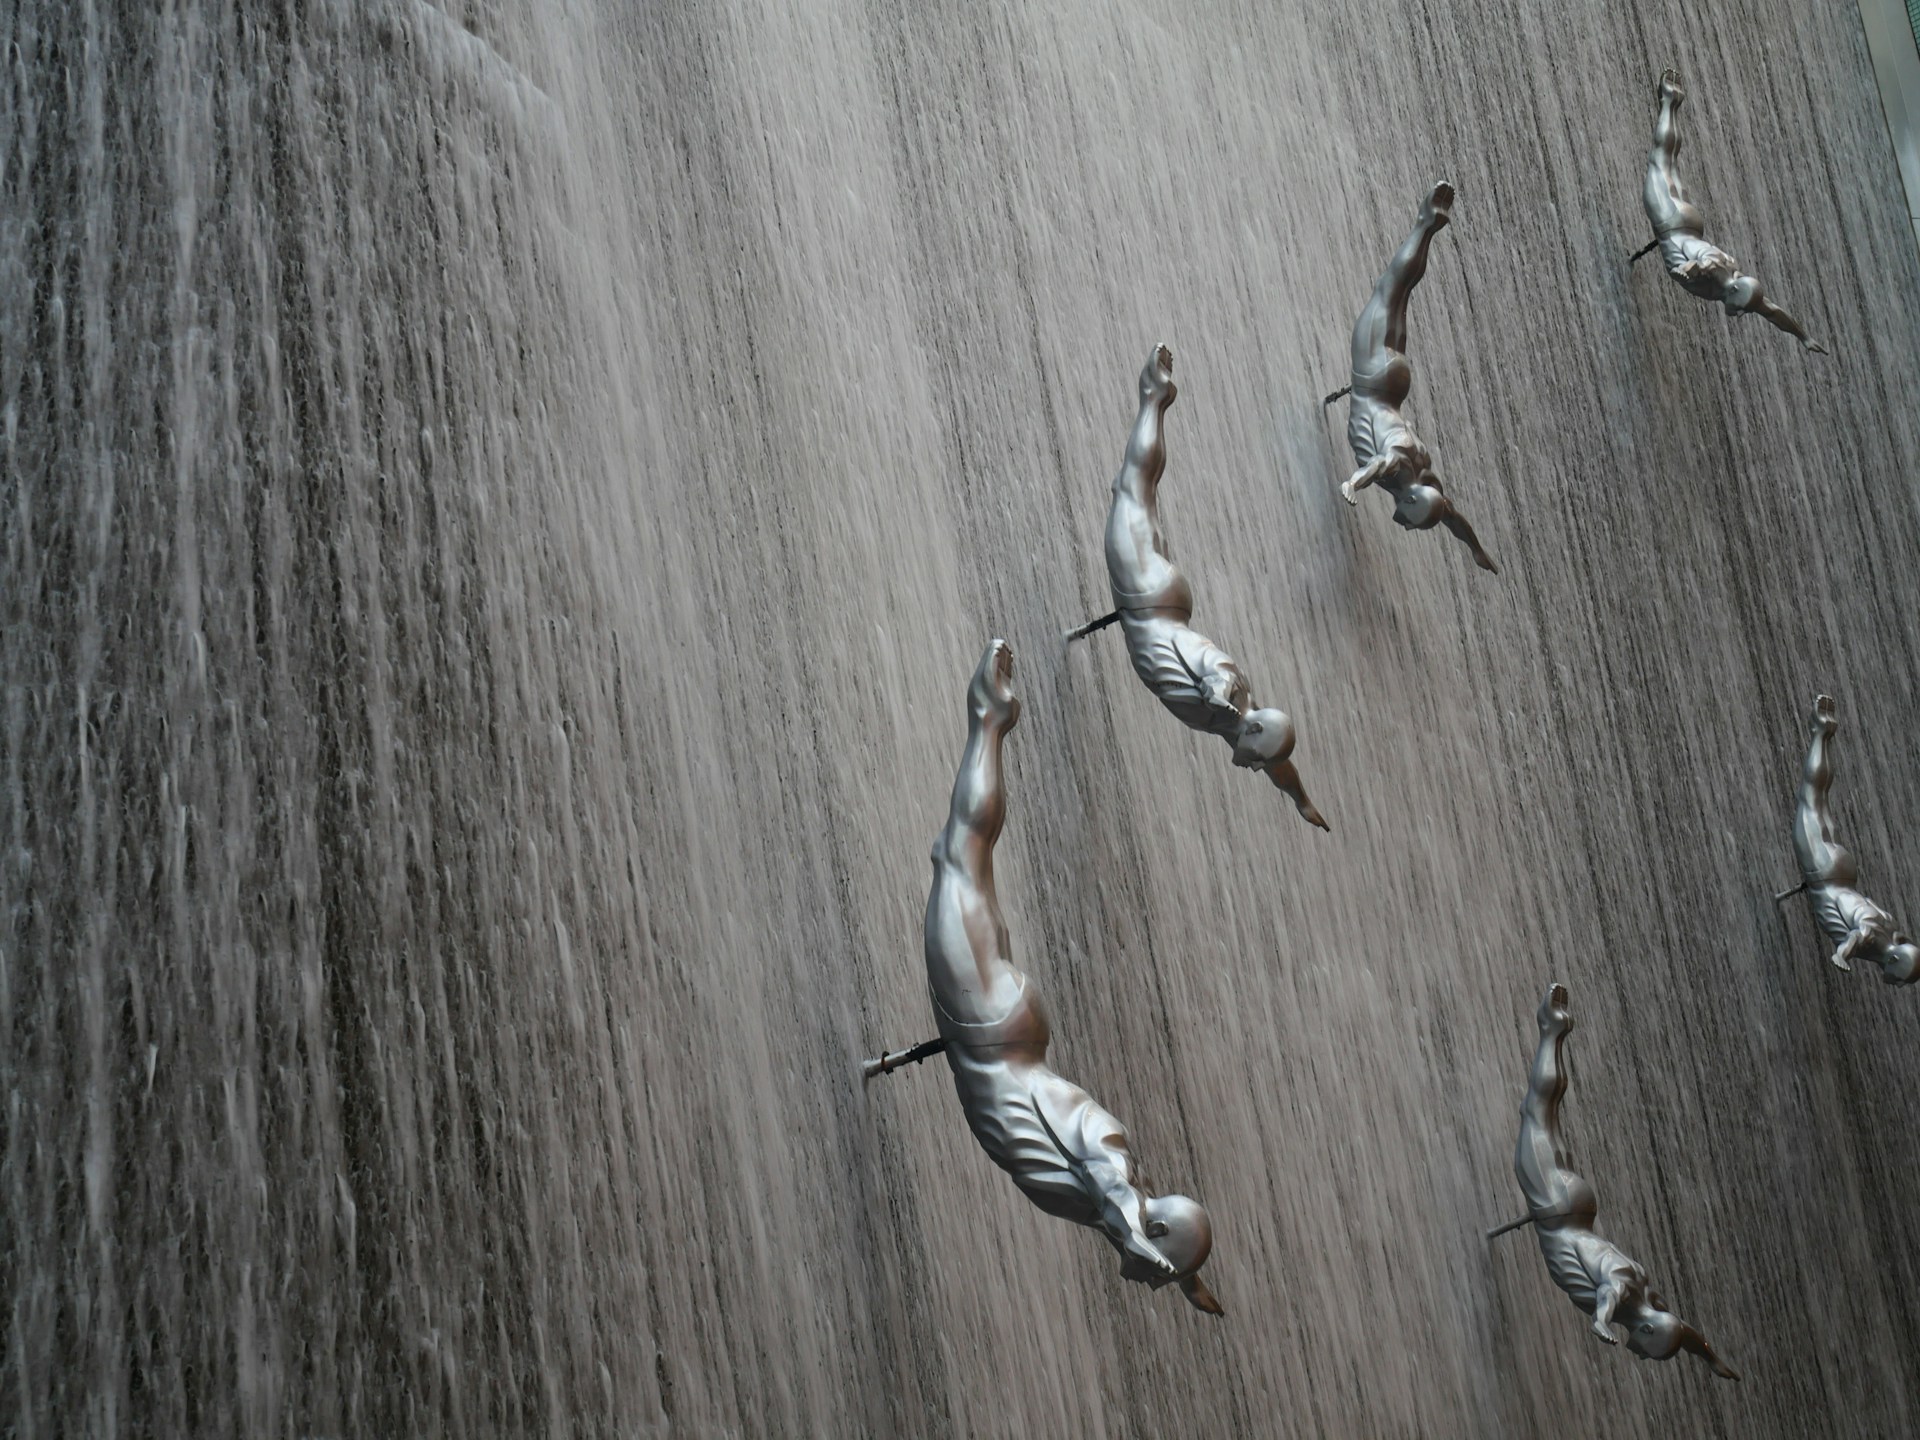 3 brown and white birds on brown wooden surface